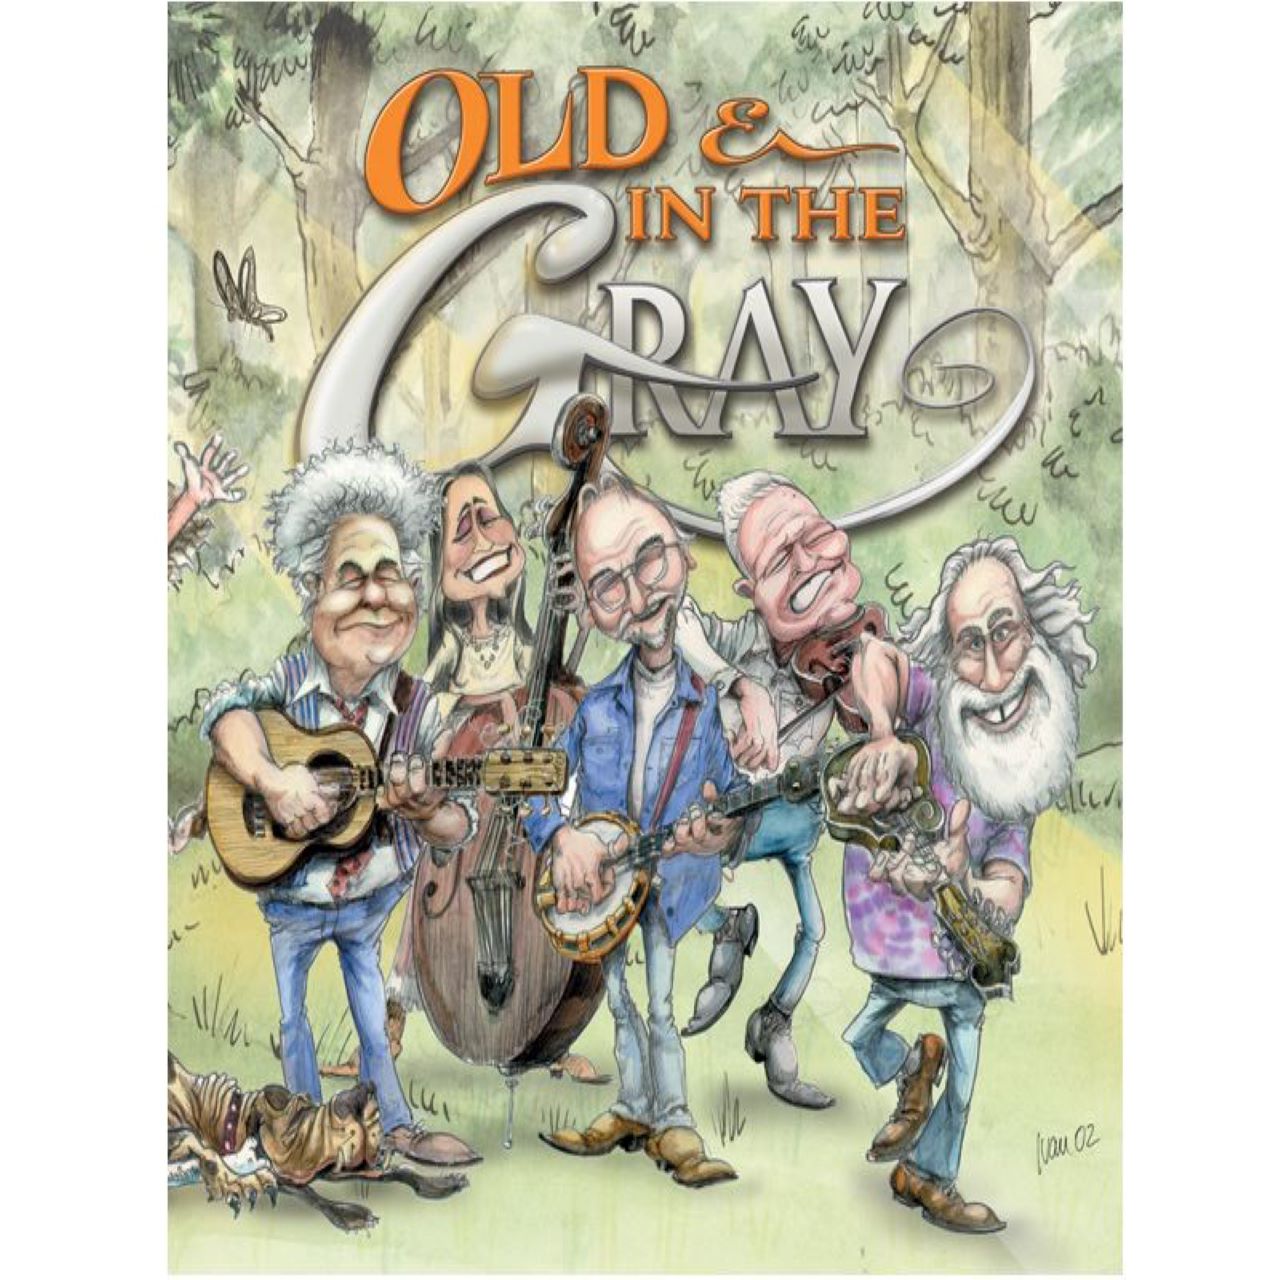 Old & In The Gray - Old & In The Gray cover album